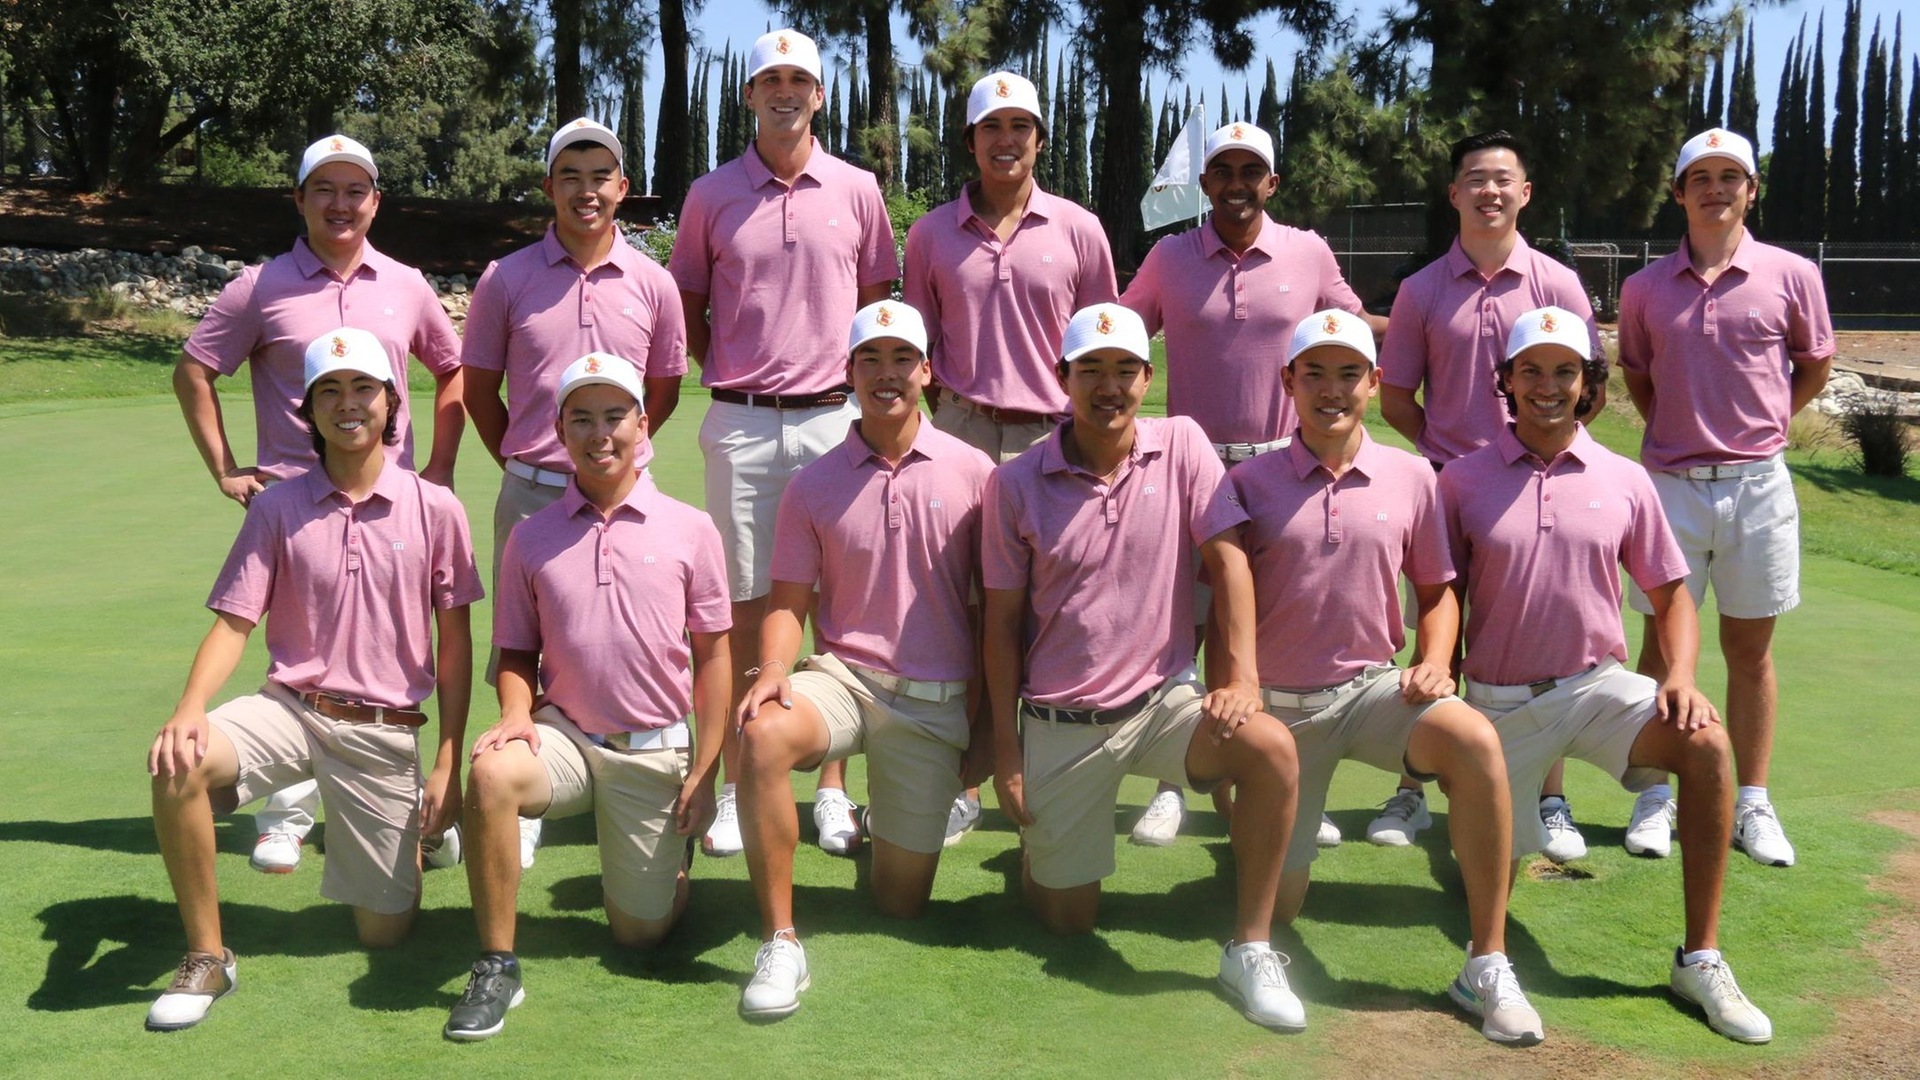 The CMS men's golf team jumped 11 spots in the latest poll